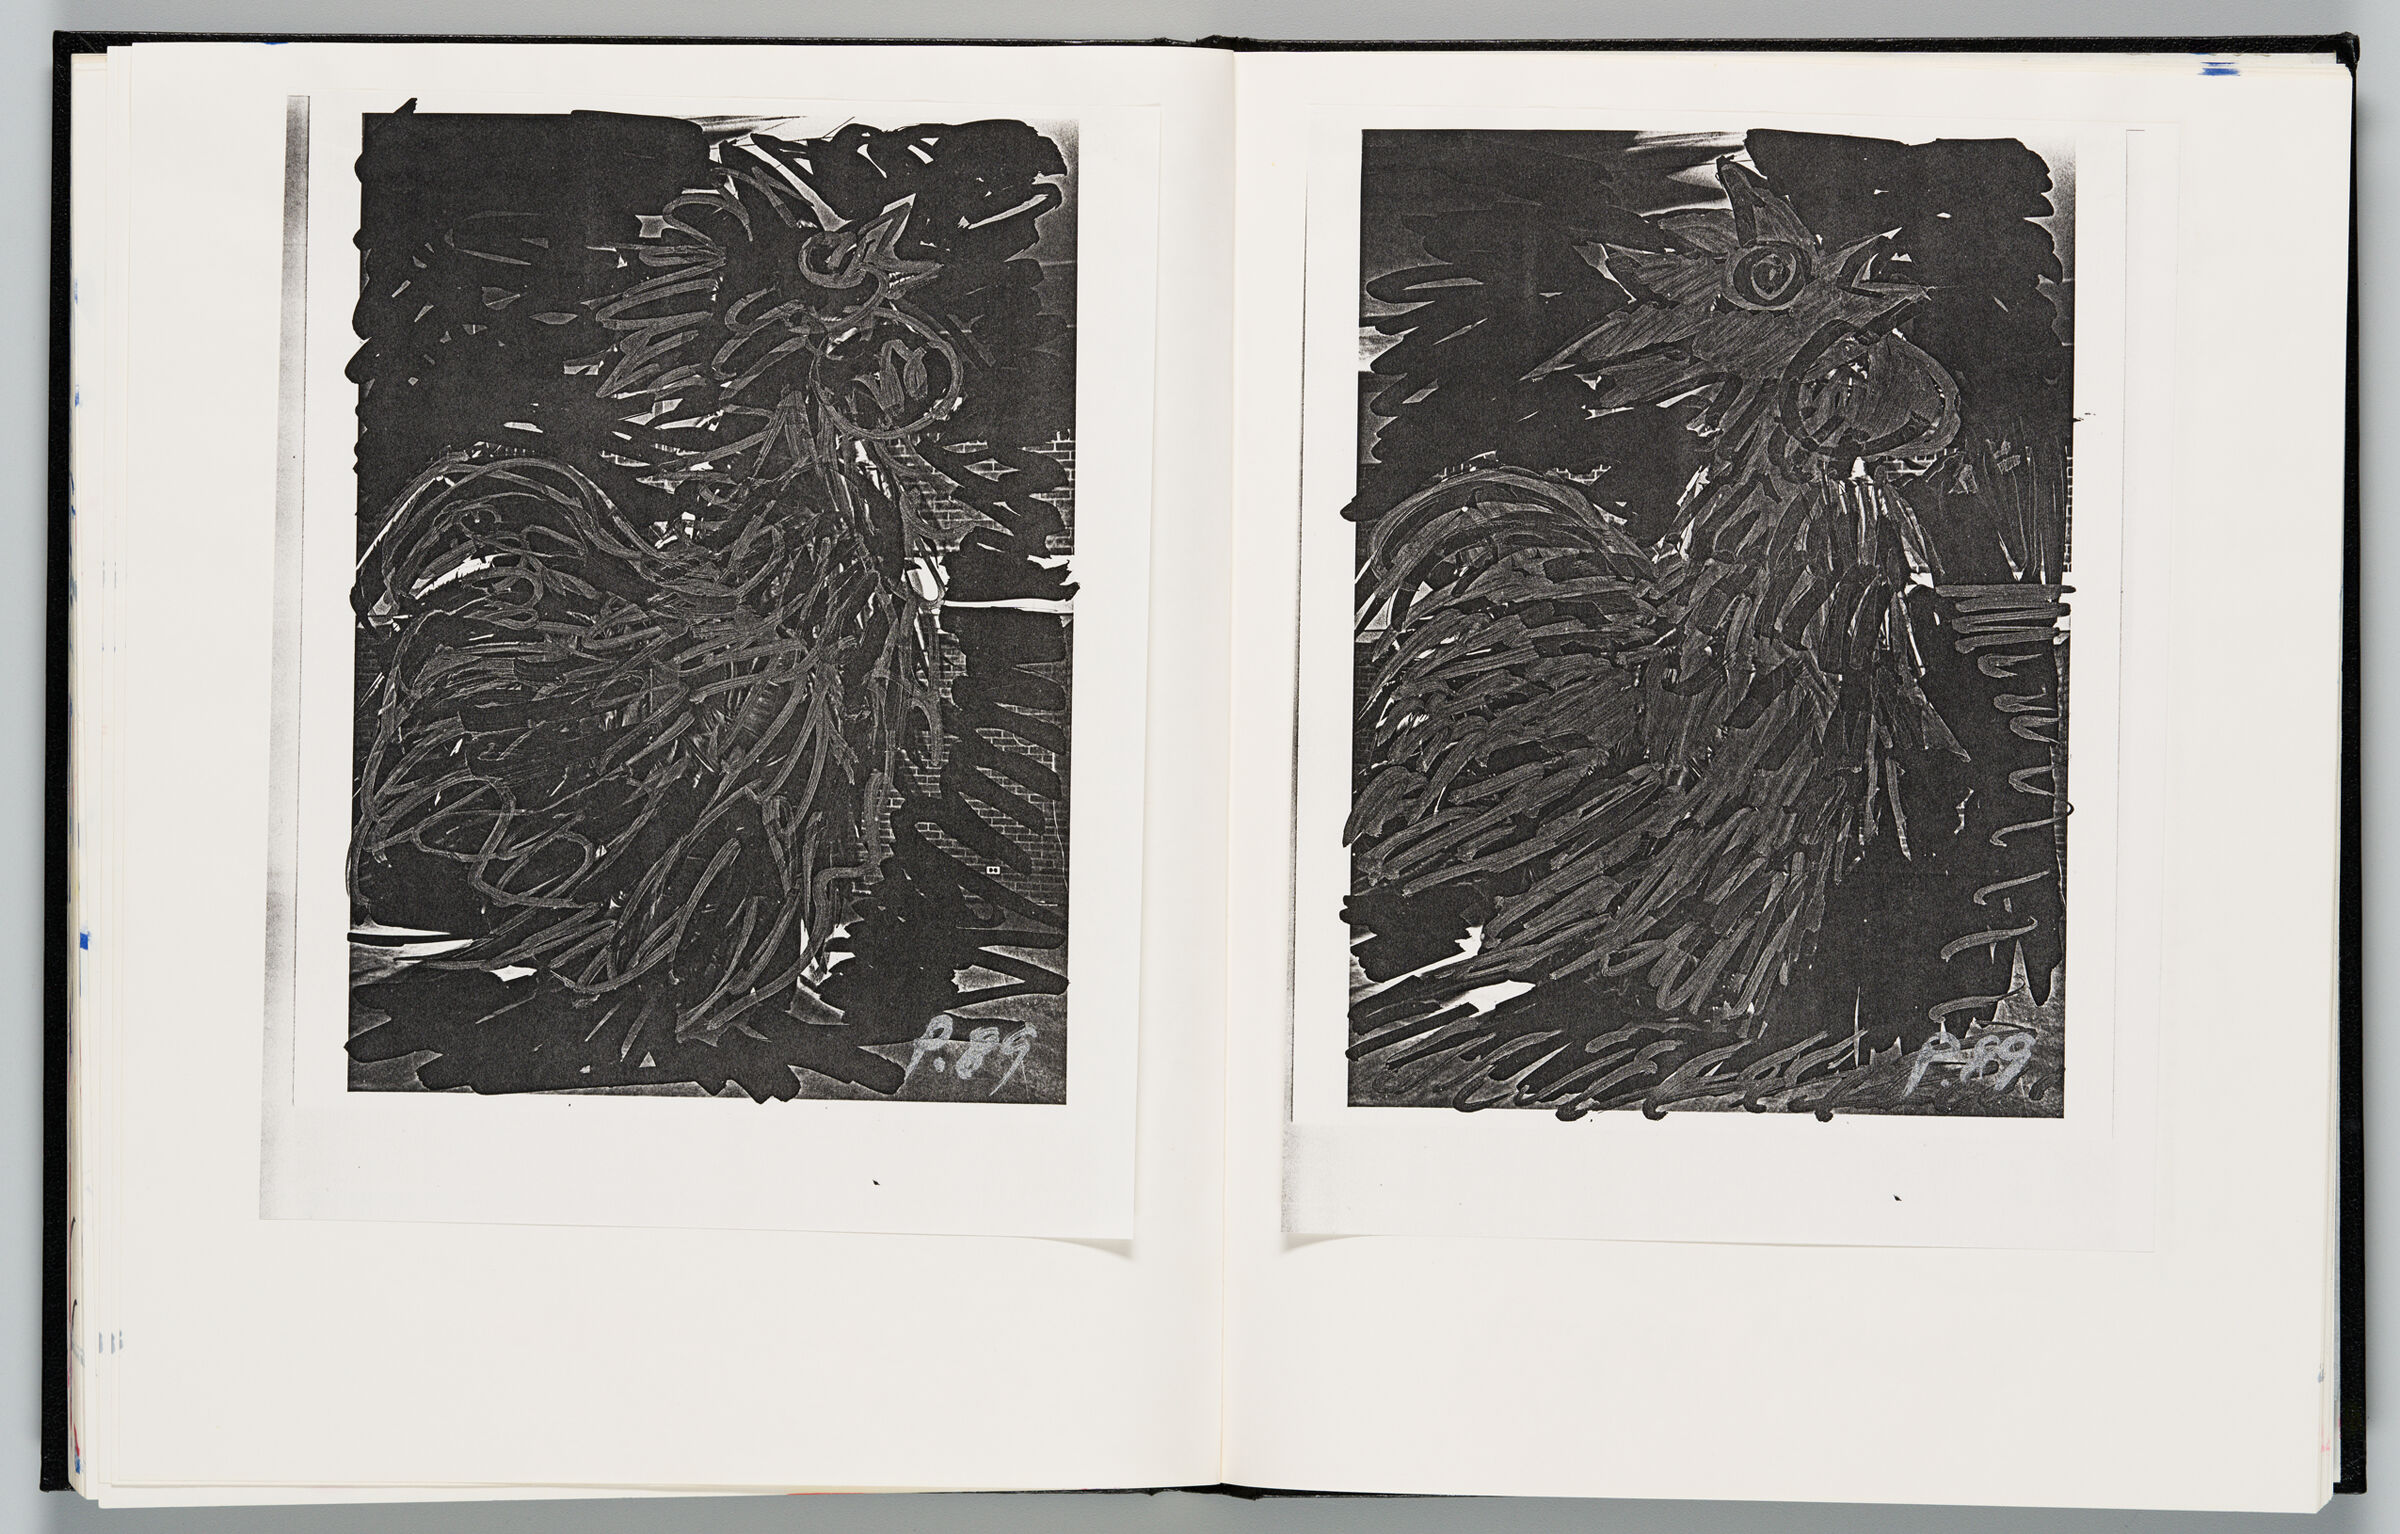 Untitled (Photocopy Of Rooster Sketch, Left Page); Untitled (Photocopy Of Rooster Sketch, Right Page)